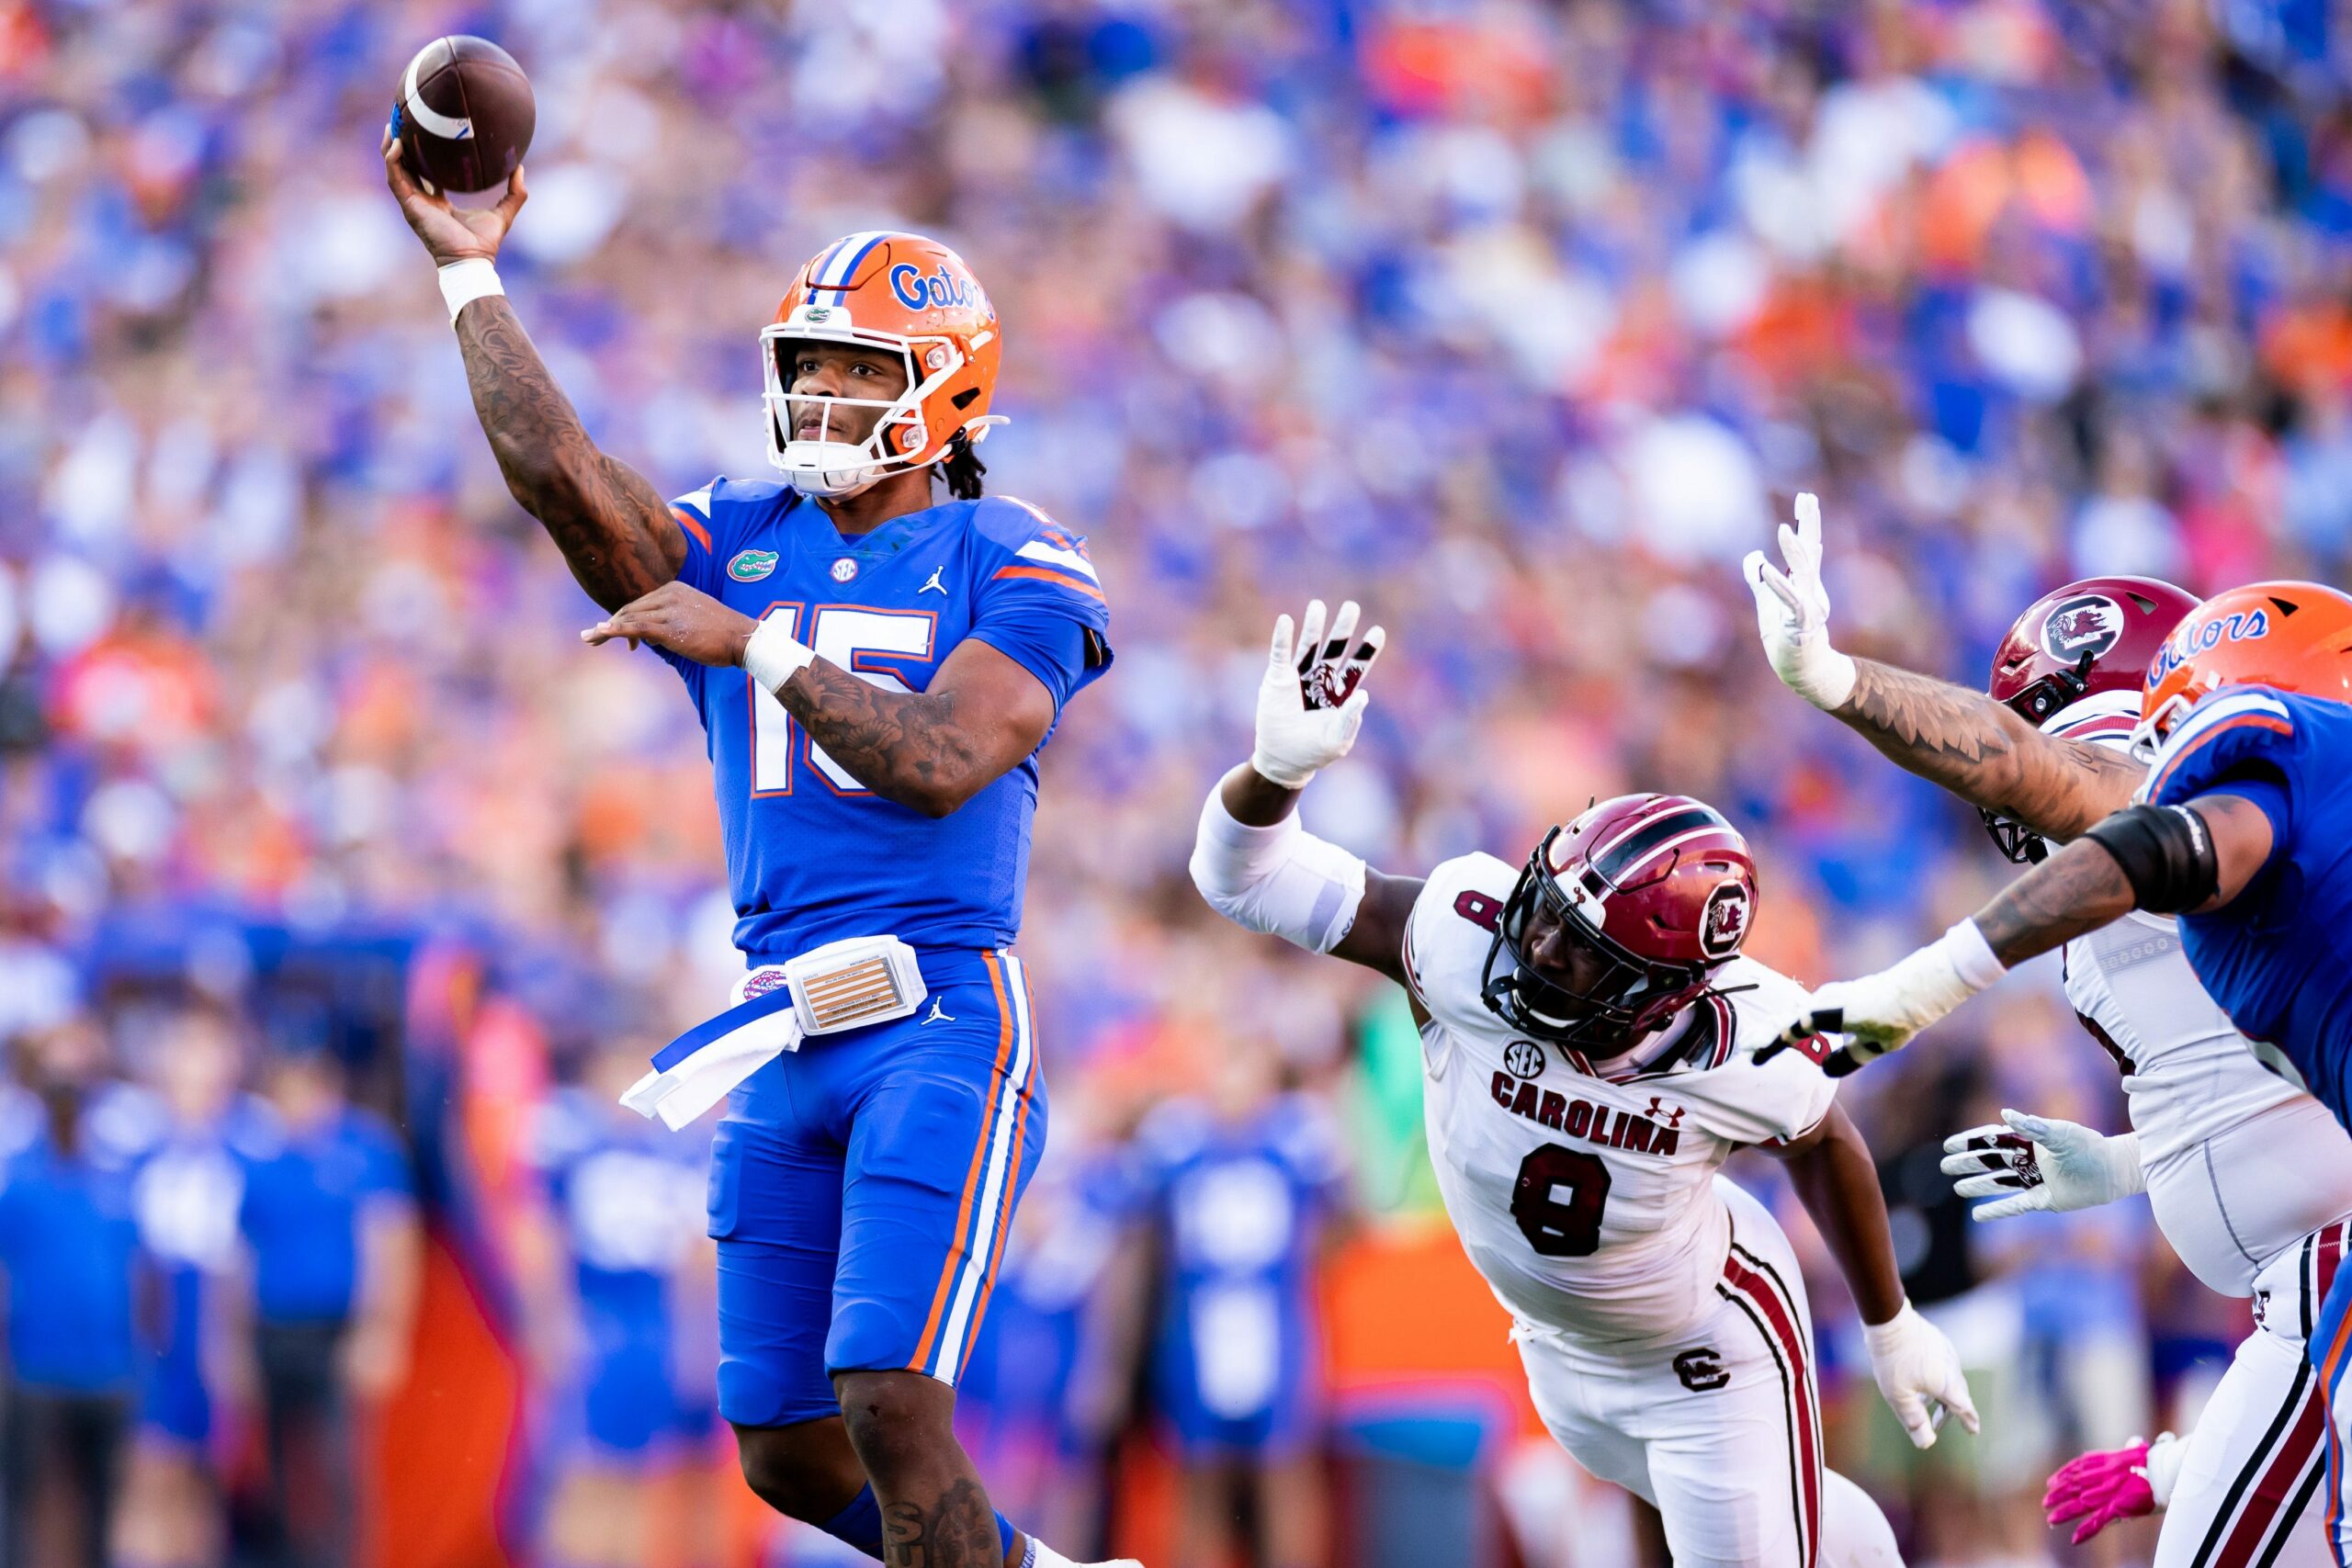 Florida in the top 40 of ESPN’s SP+ rankings after bowl season